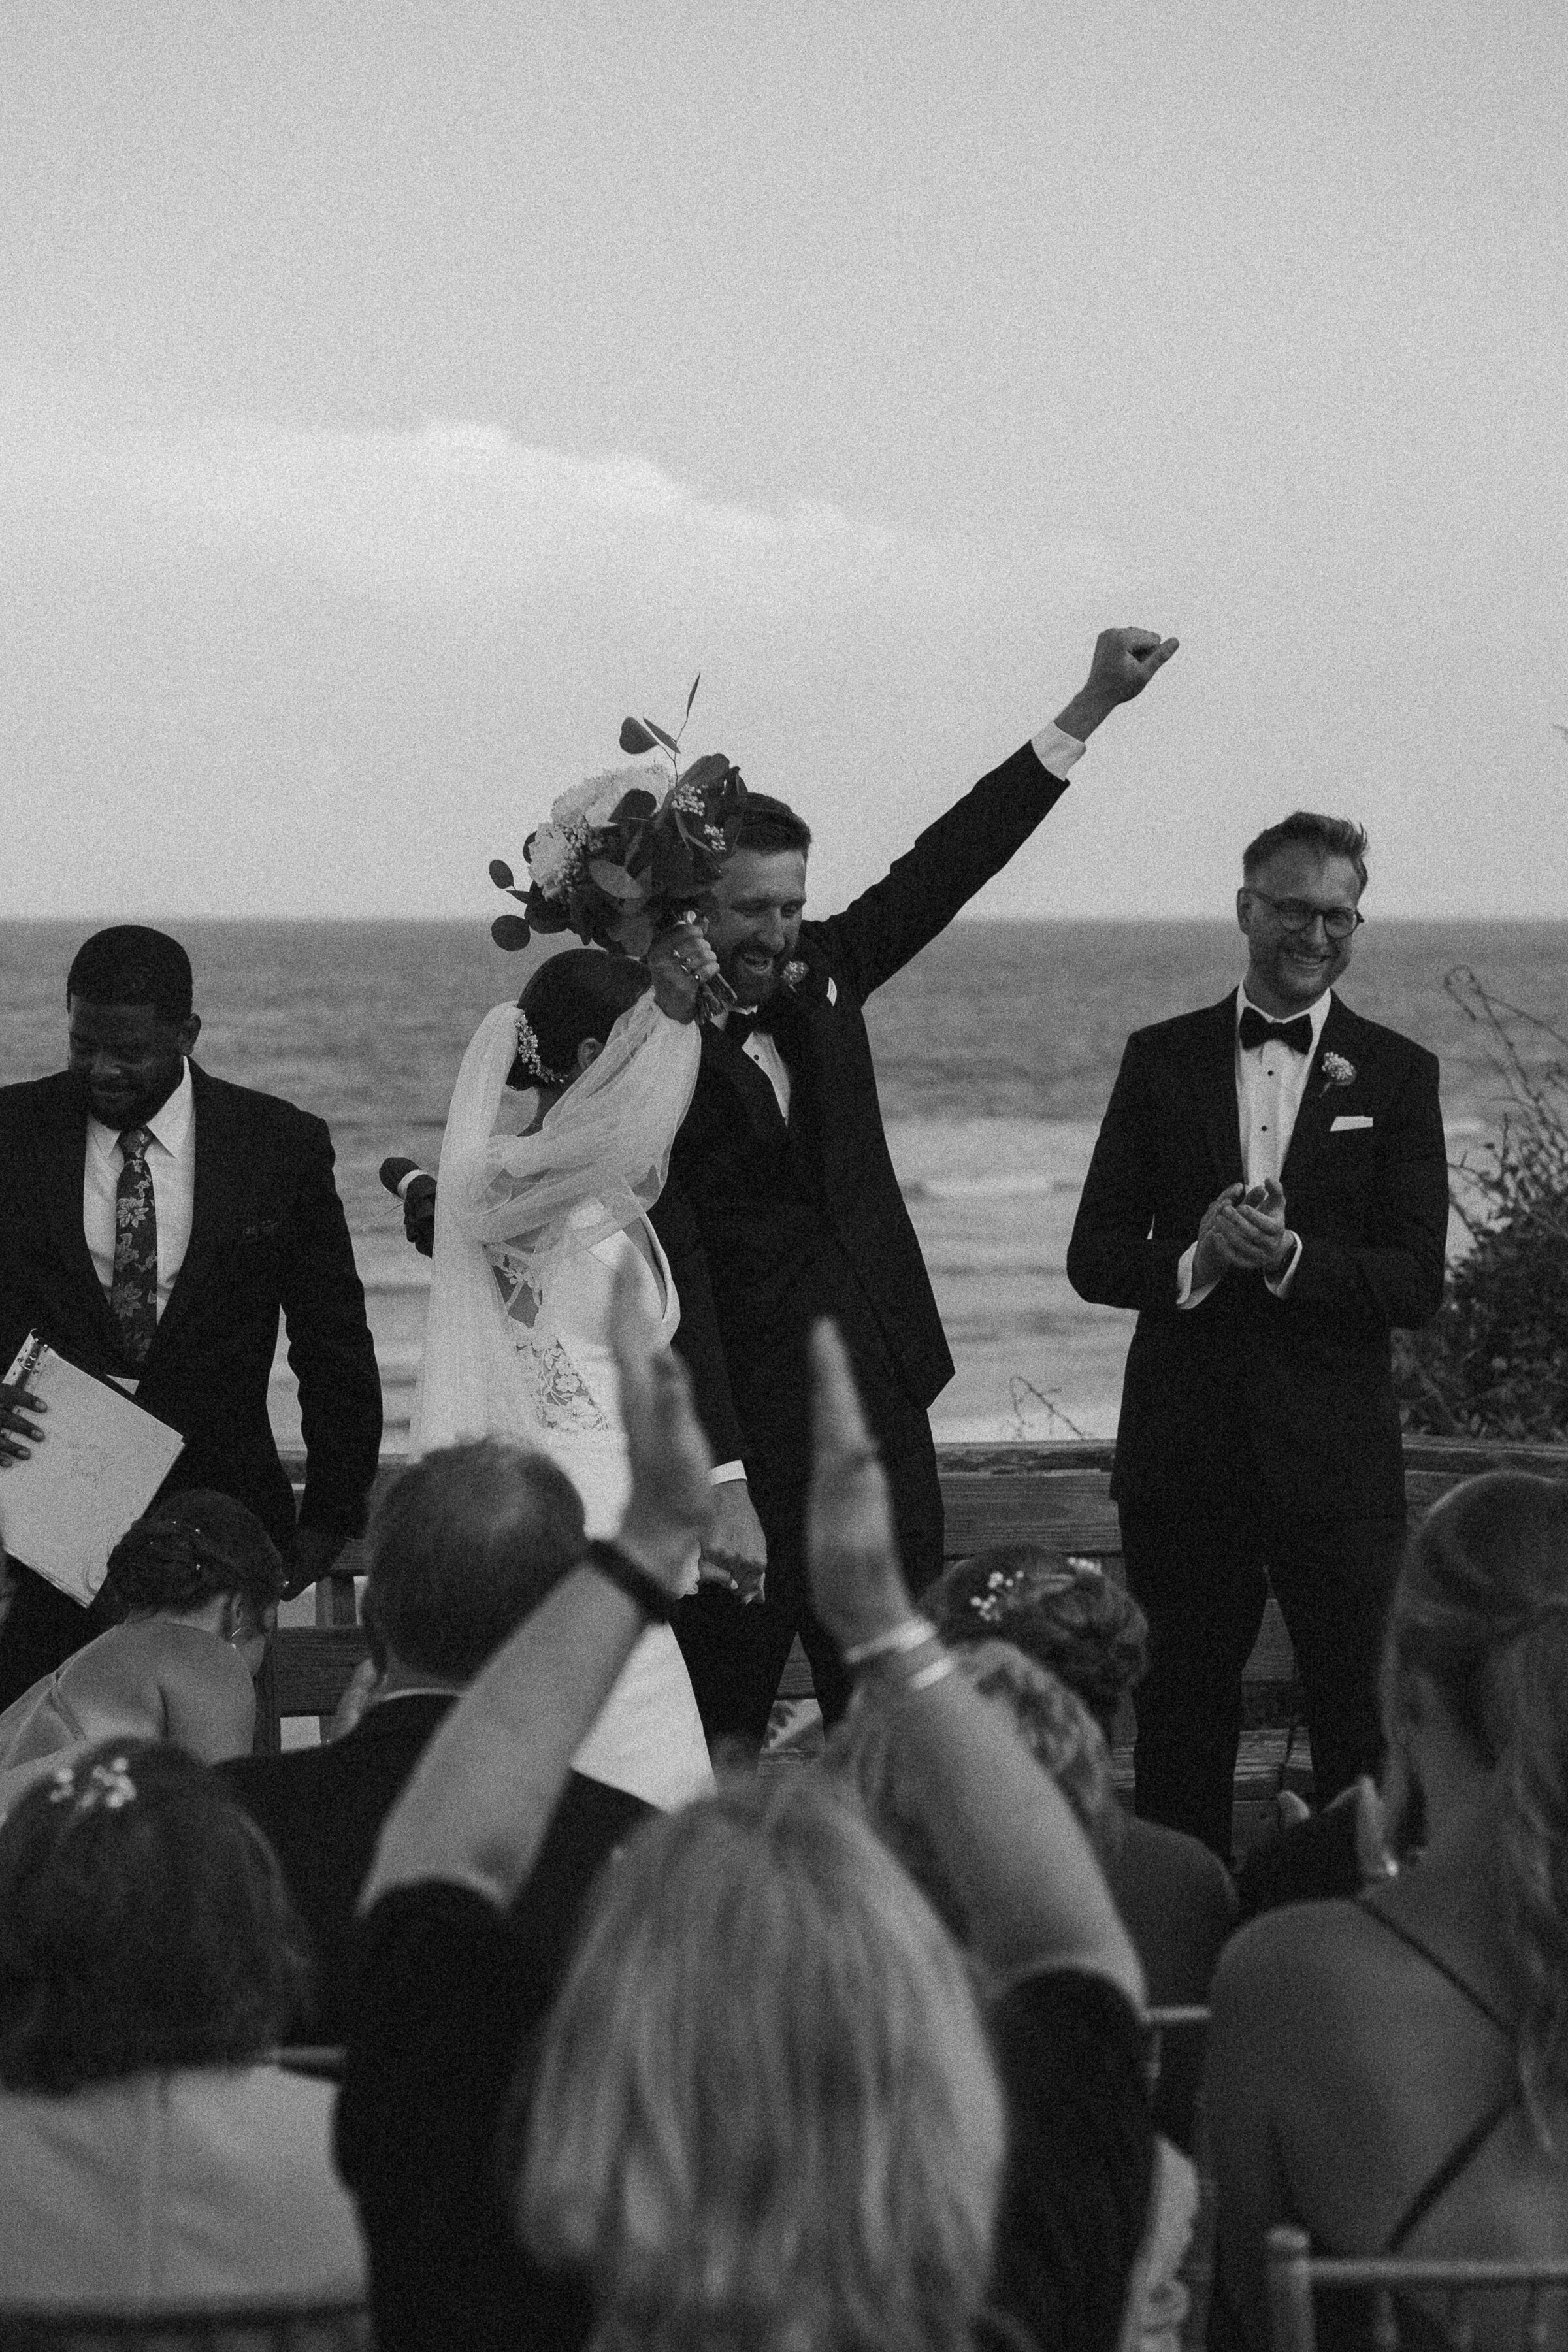 Newlyweds cheering and walking down the aisle post-ceremony by the beach.